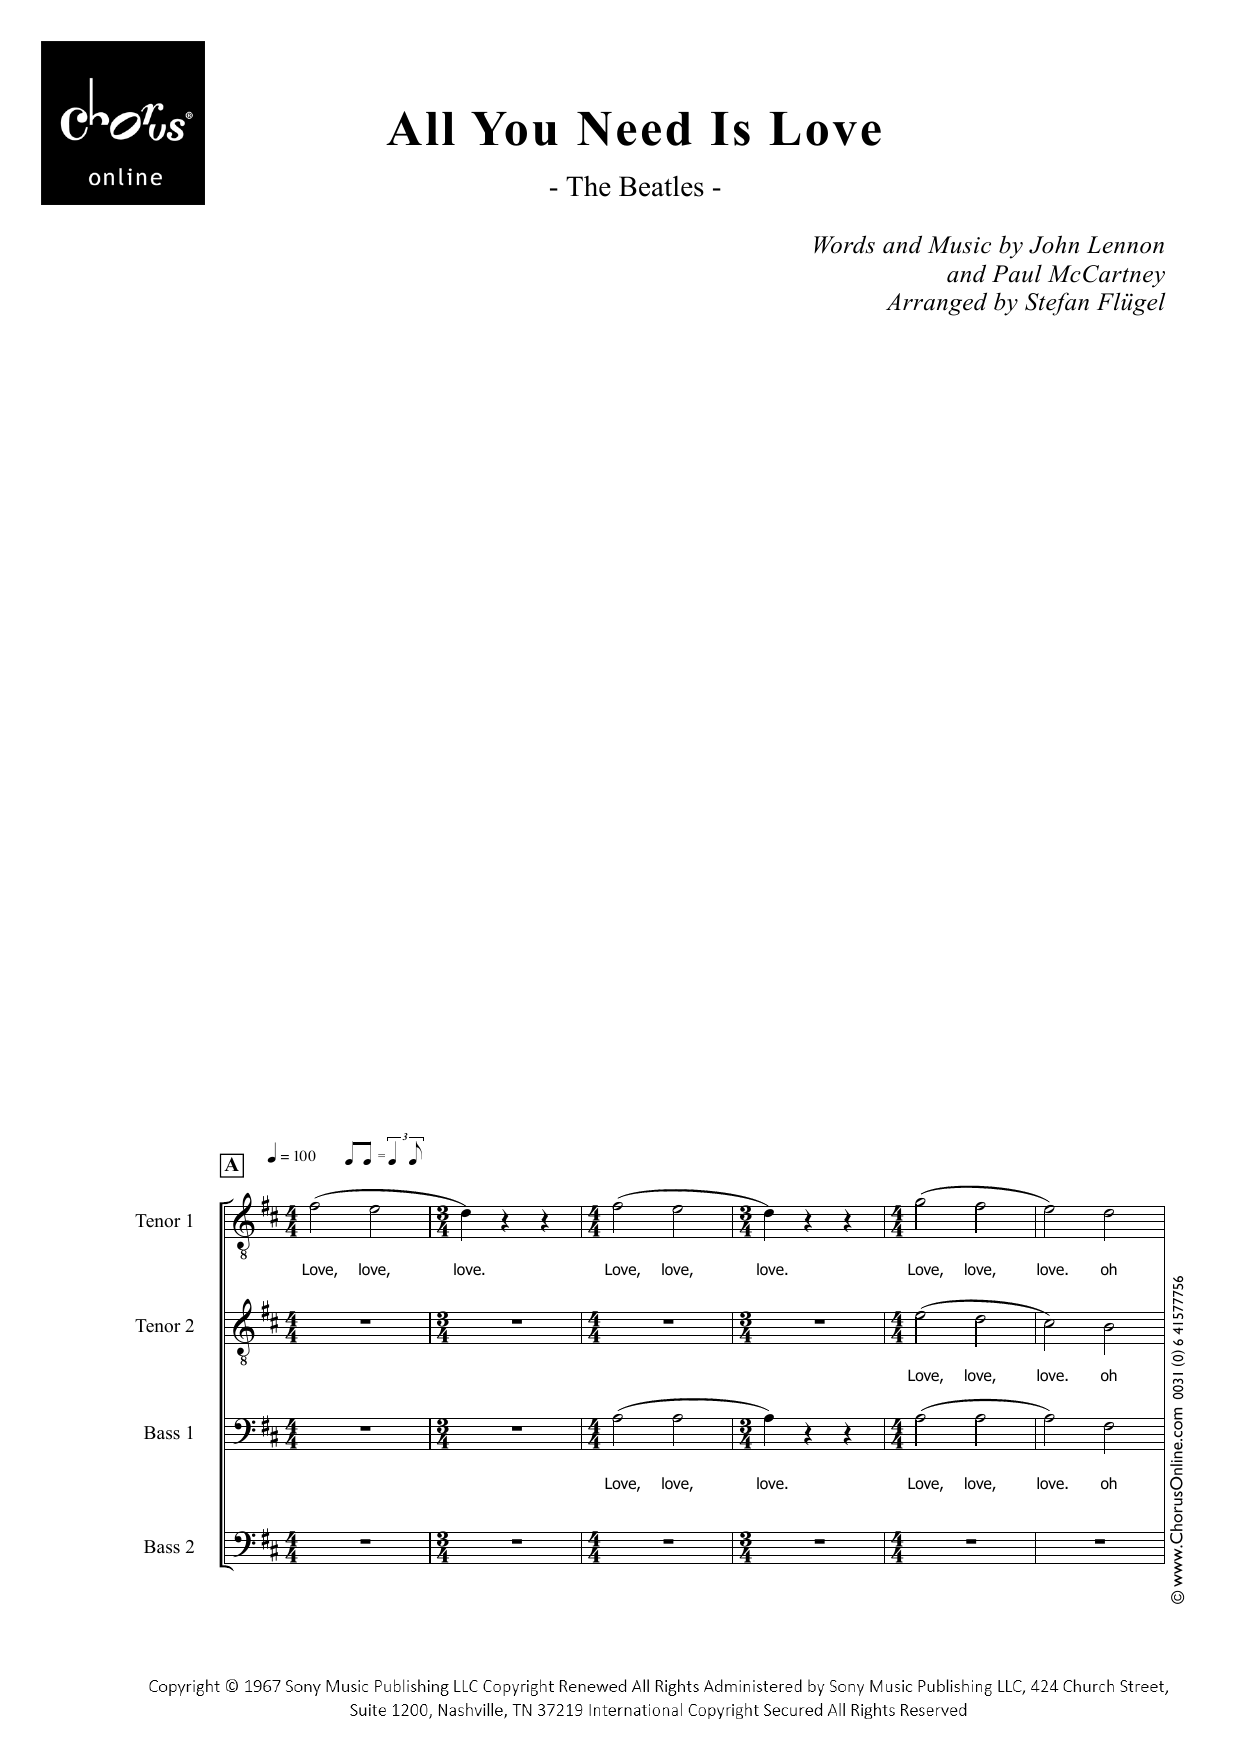 The Beatles All You Need Is Love (arr. Stefan Flügel) sheet music notes printable PDF score